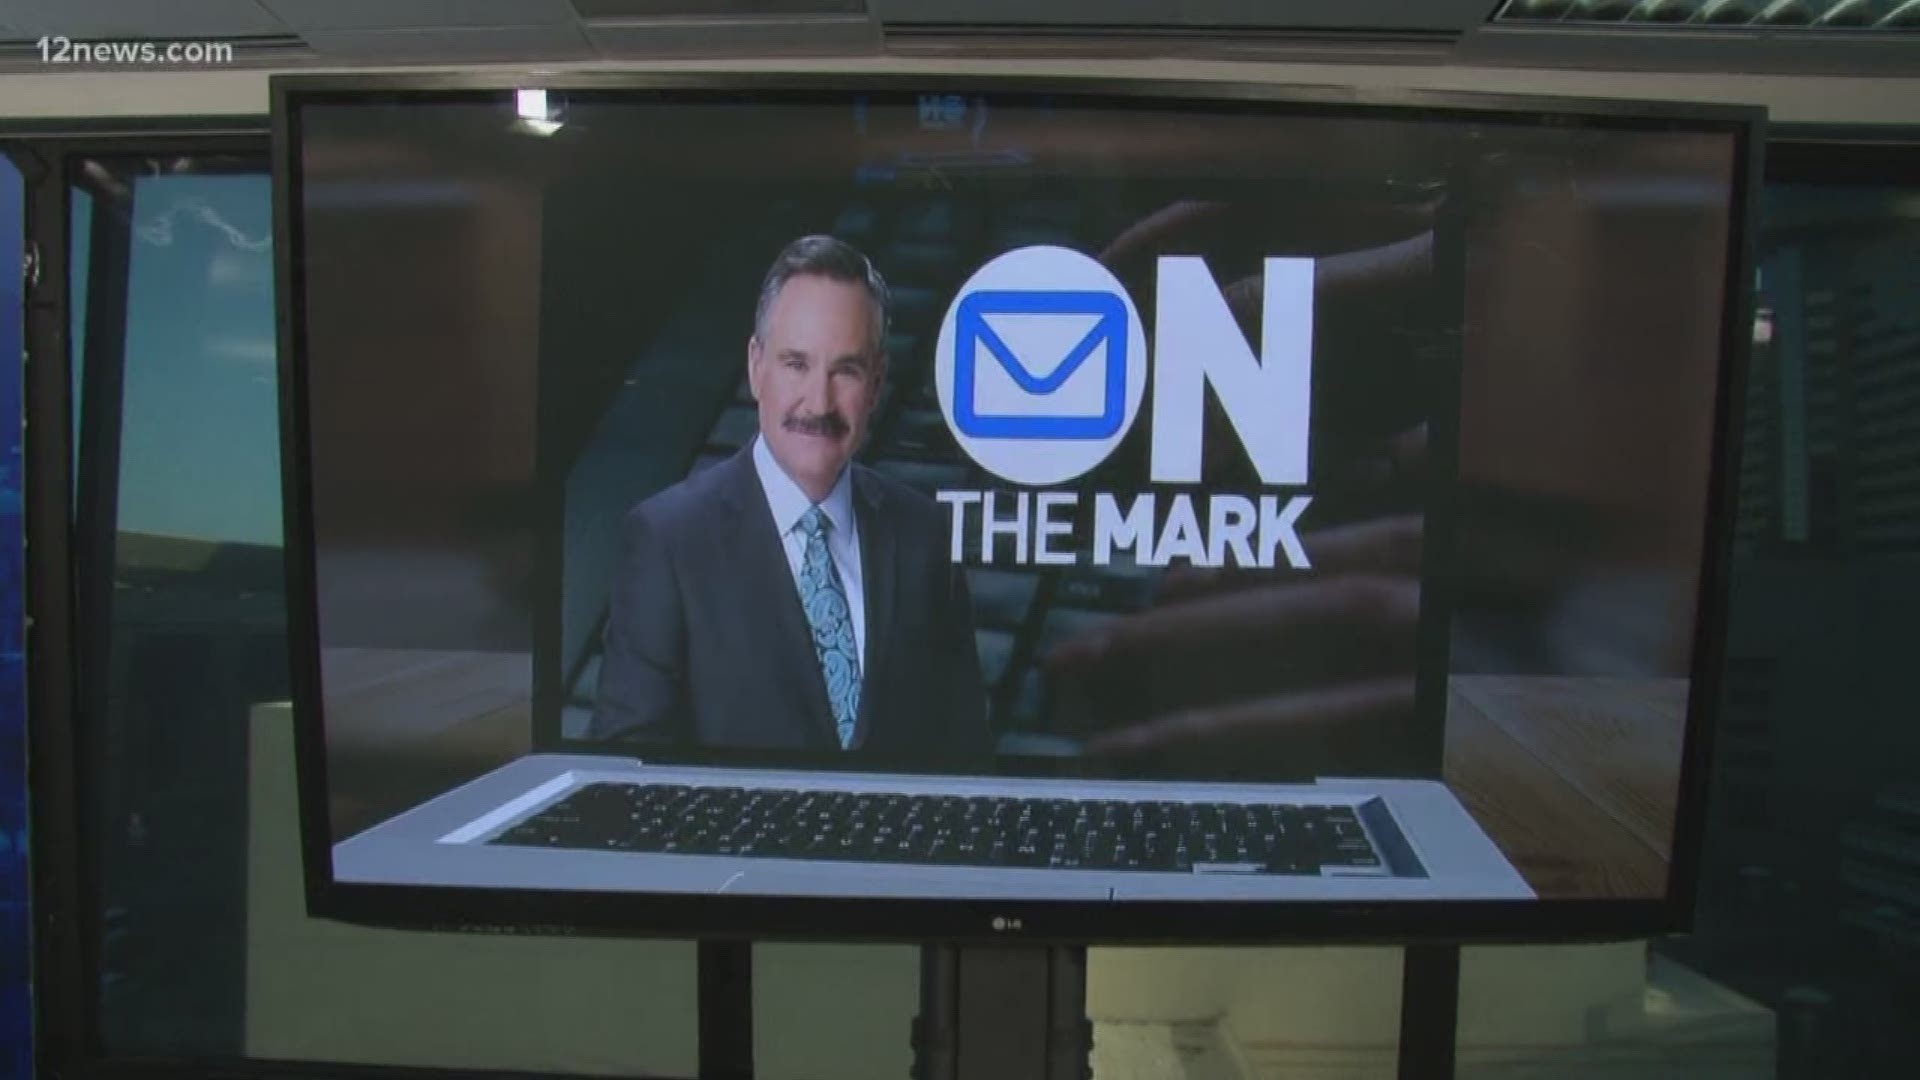 In this week's On the Mark, Mark Curtis reads some viewers' thoughts on the education crisis in our state and other big stories from the past week.